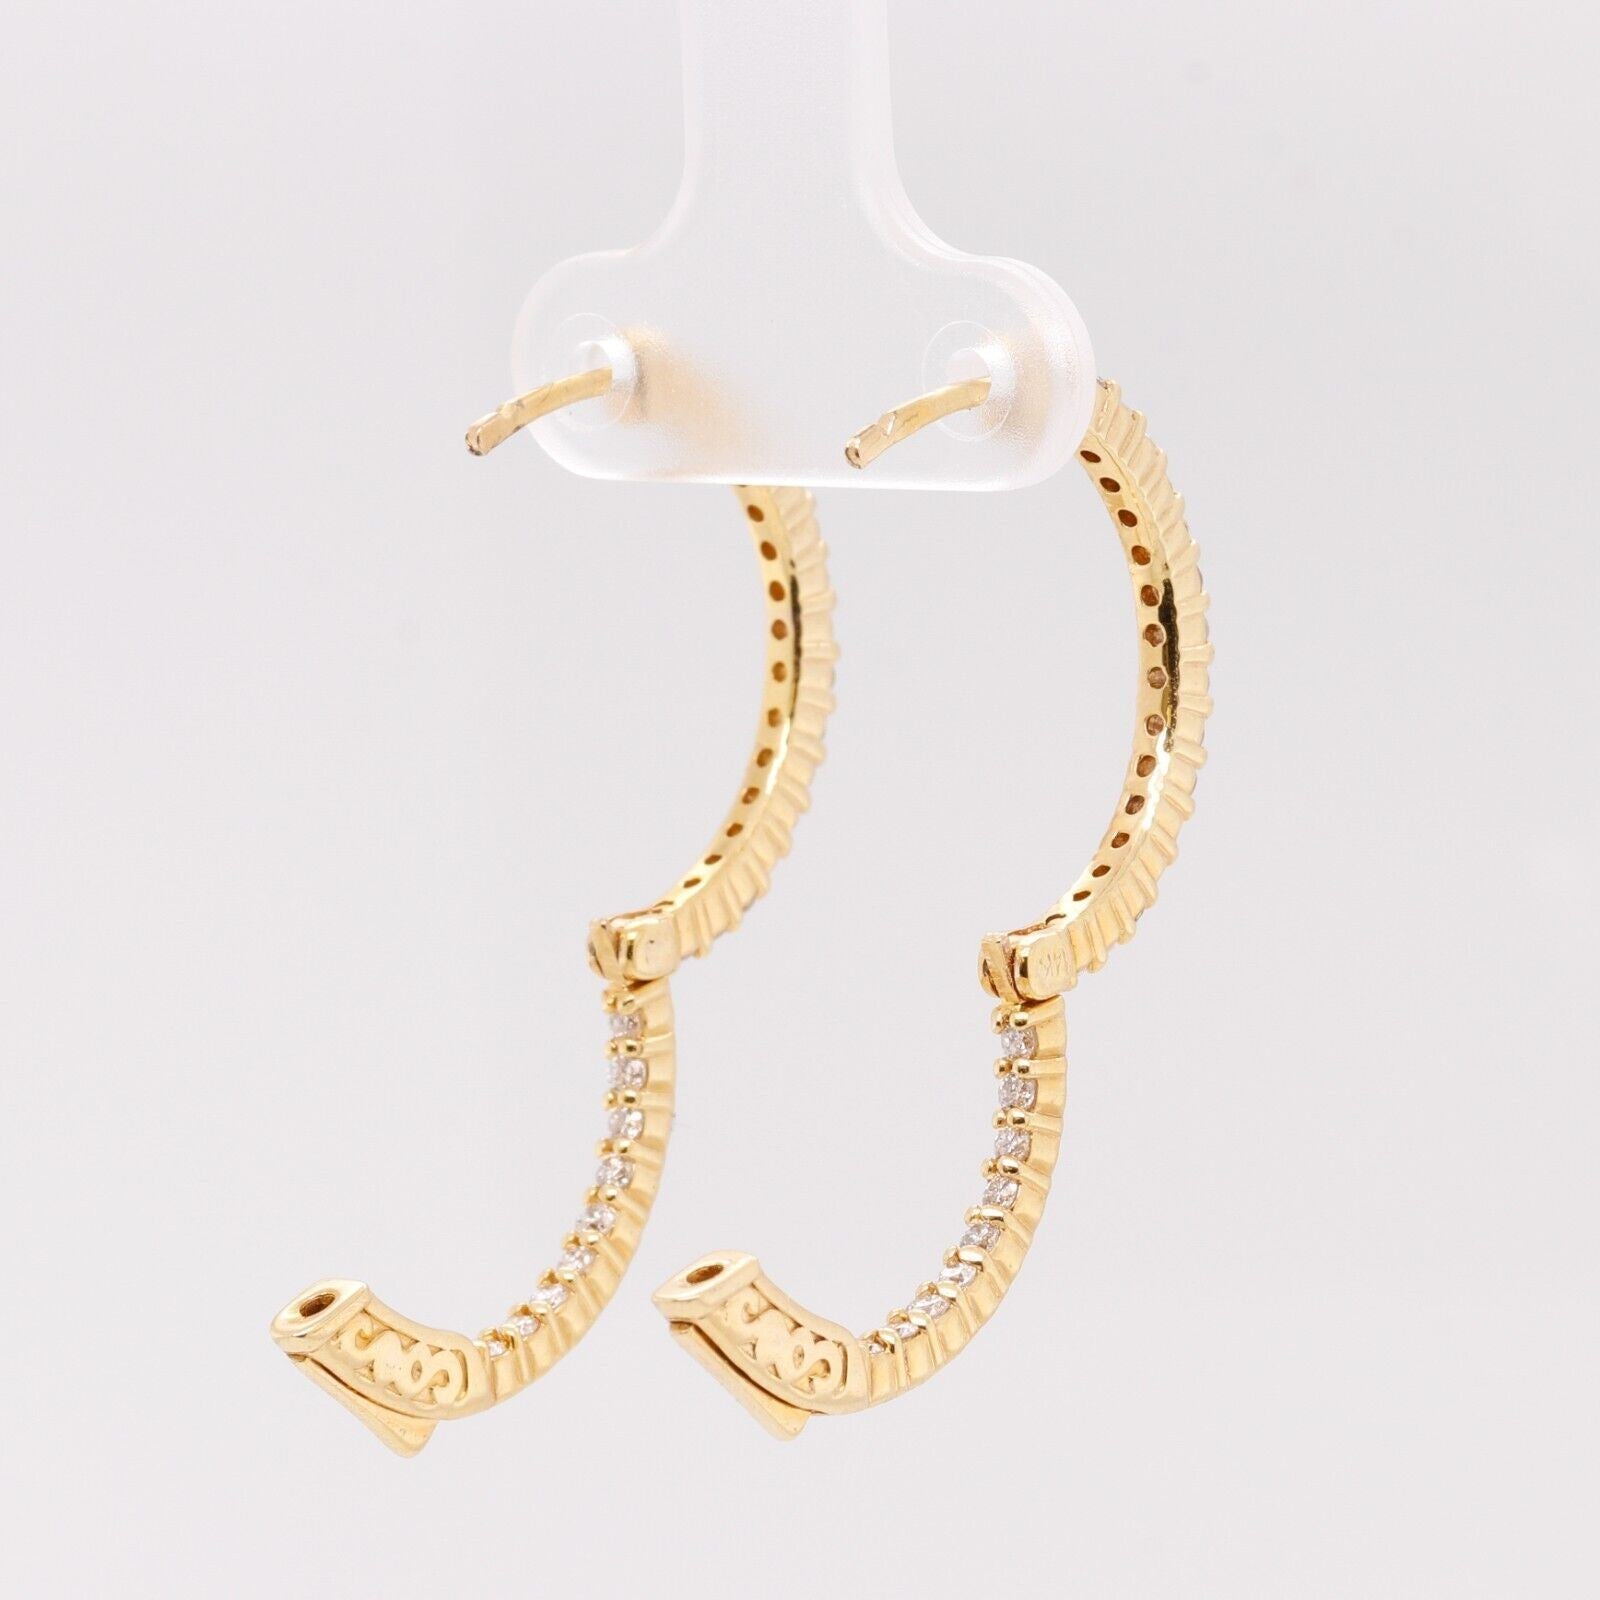 14k Yellow Gold Diamond In & Out Hoop Earrings 0.75ctw G SI1 - Snap Closure